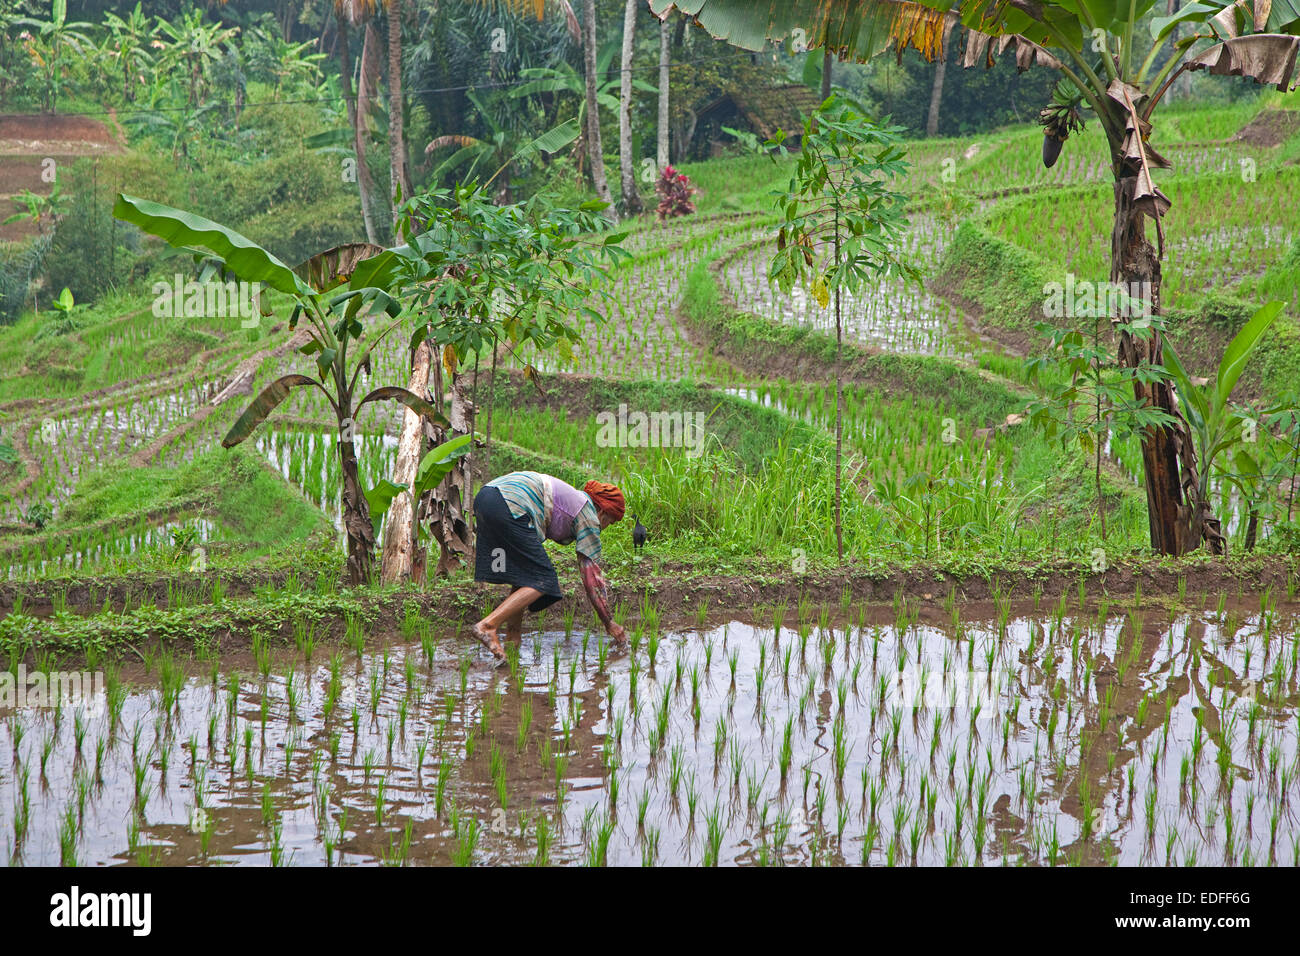 Indonesian woman planting rice in terraced rice paddy on the slopes of the Mount Gede / Gunung Gede volcano, Java, Indonesia Stock Photo